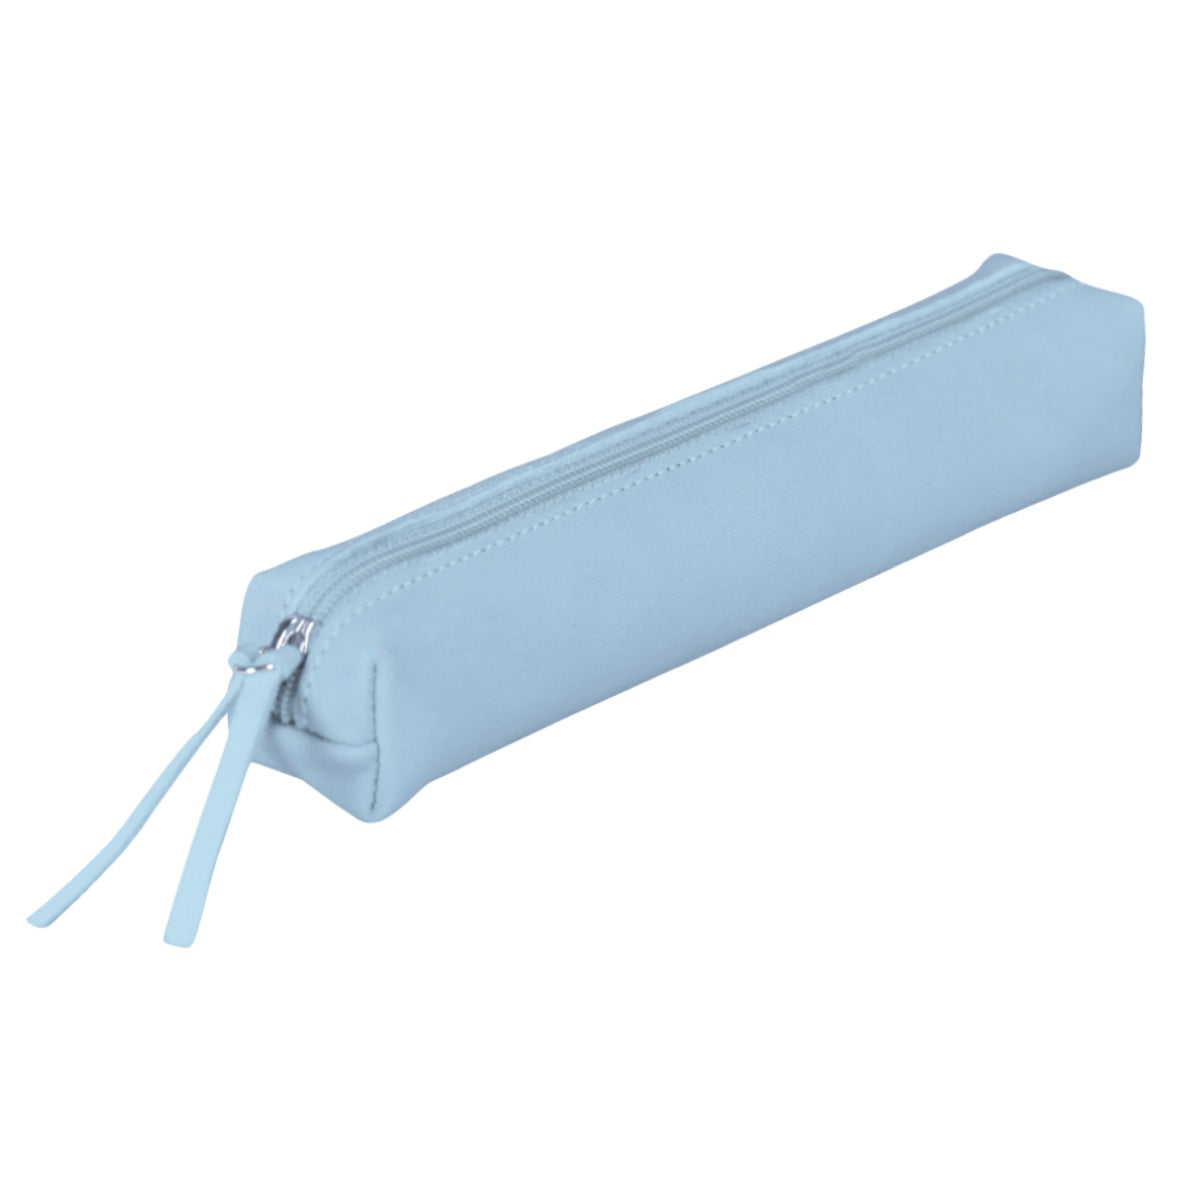 Clairefontaine Leather Slim Pencil Case, Sky Blue